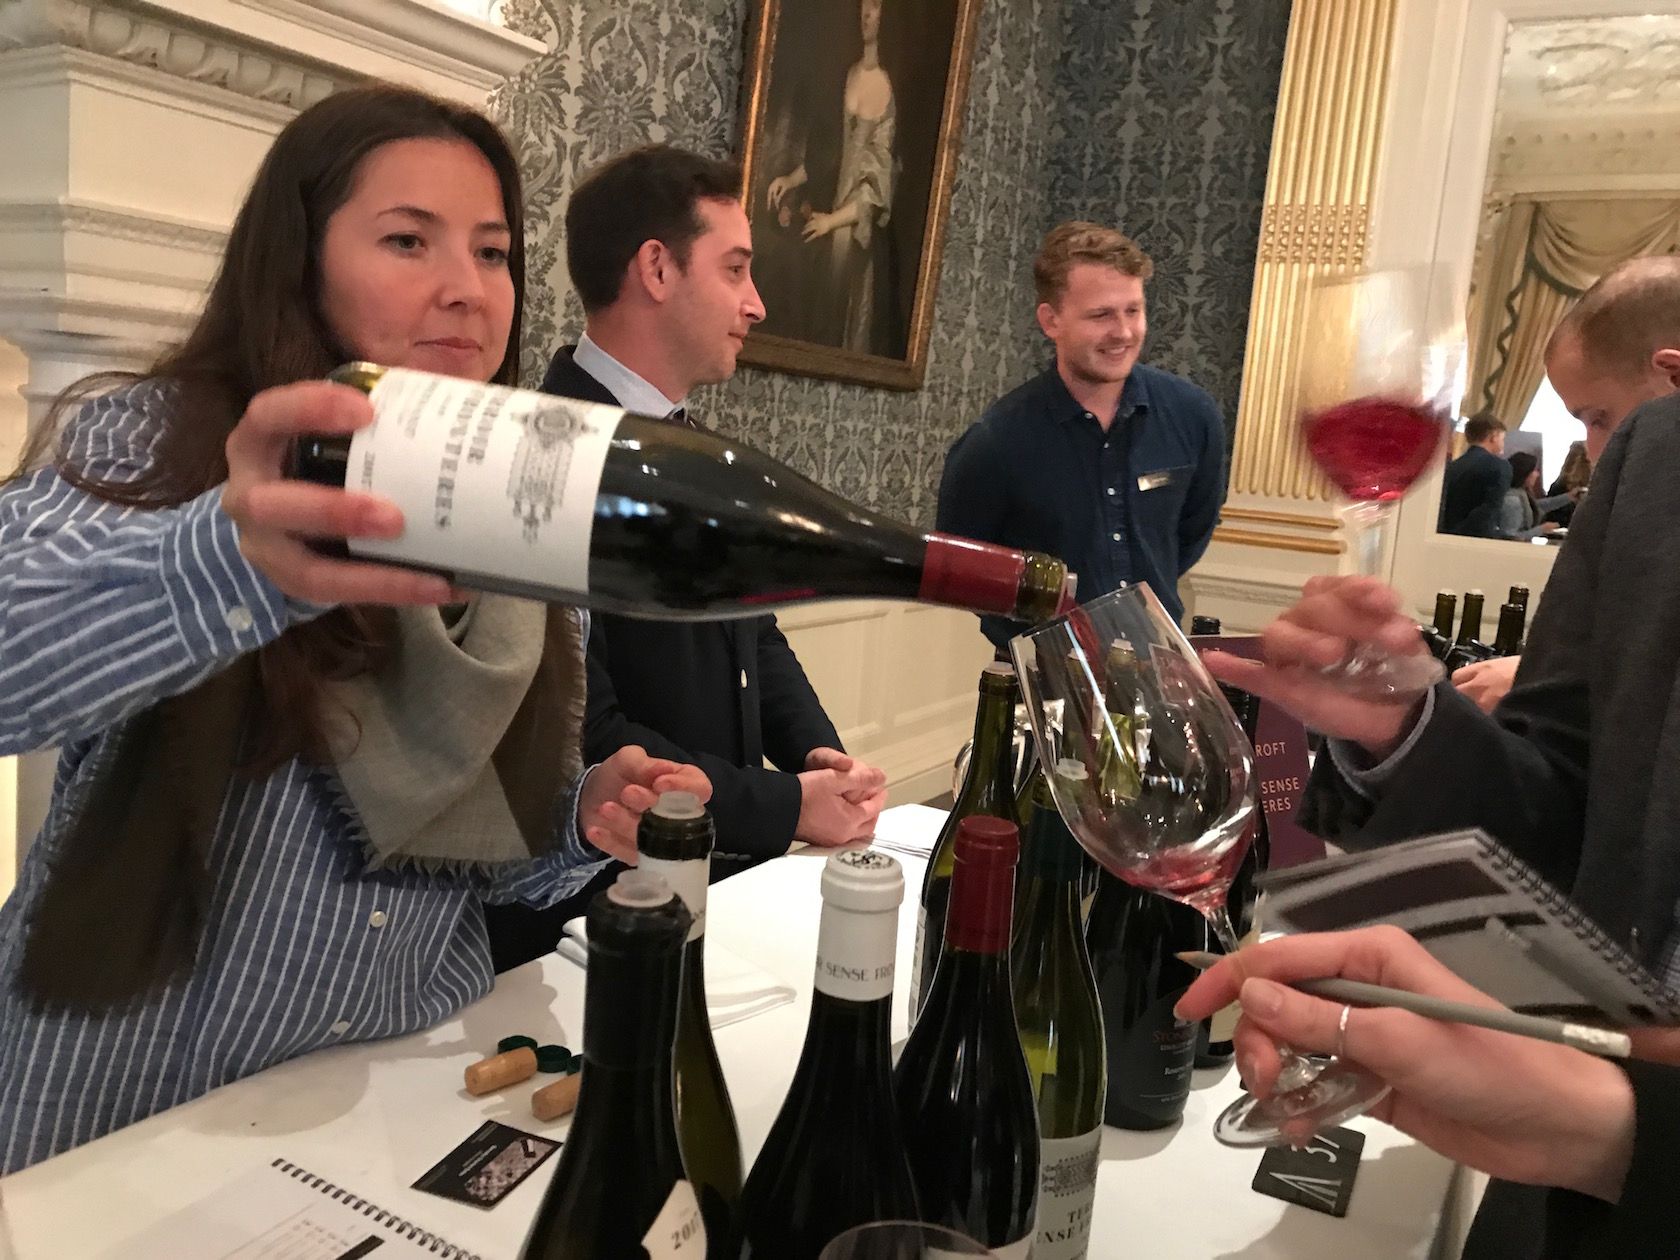 How Armit’s tasting went around the world in 80 wines